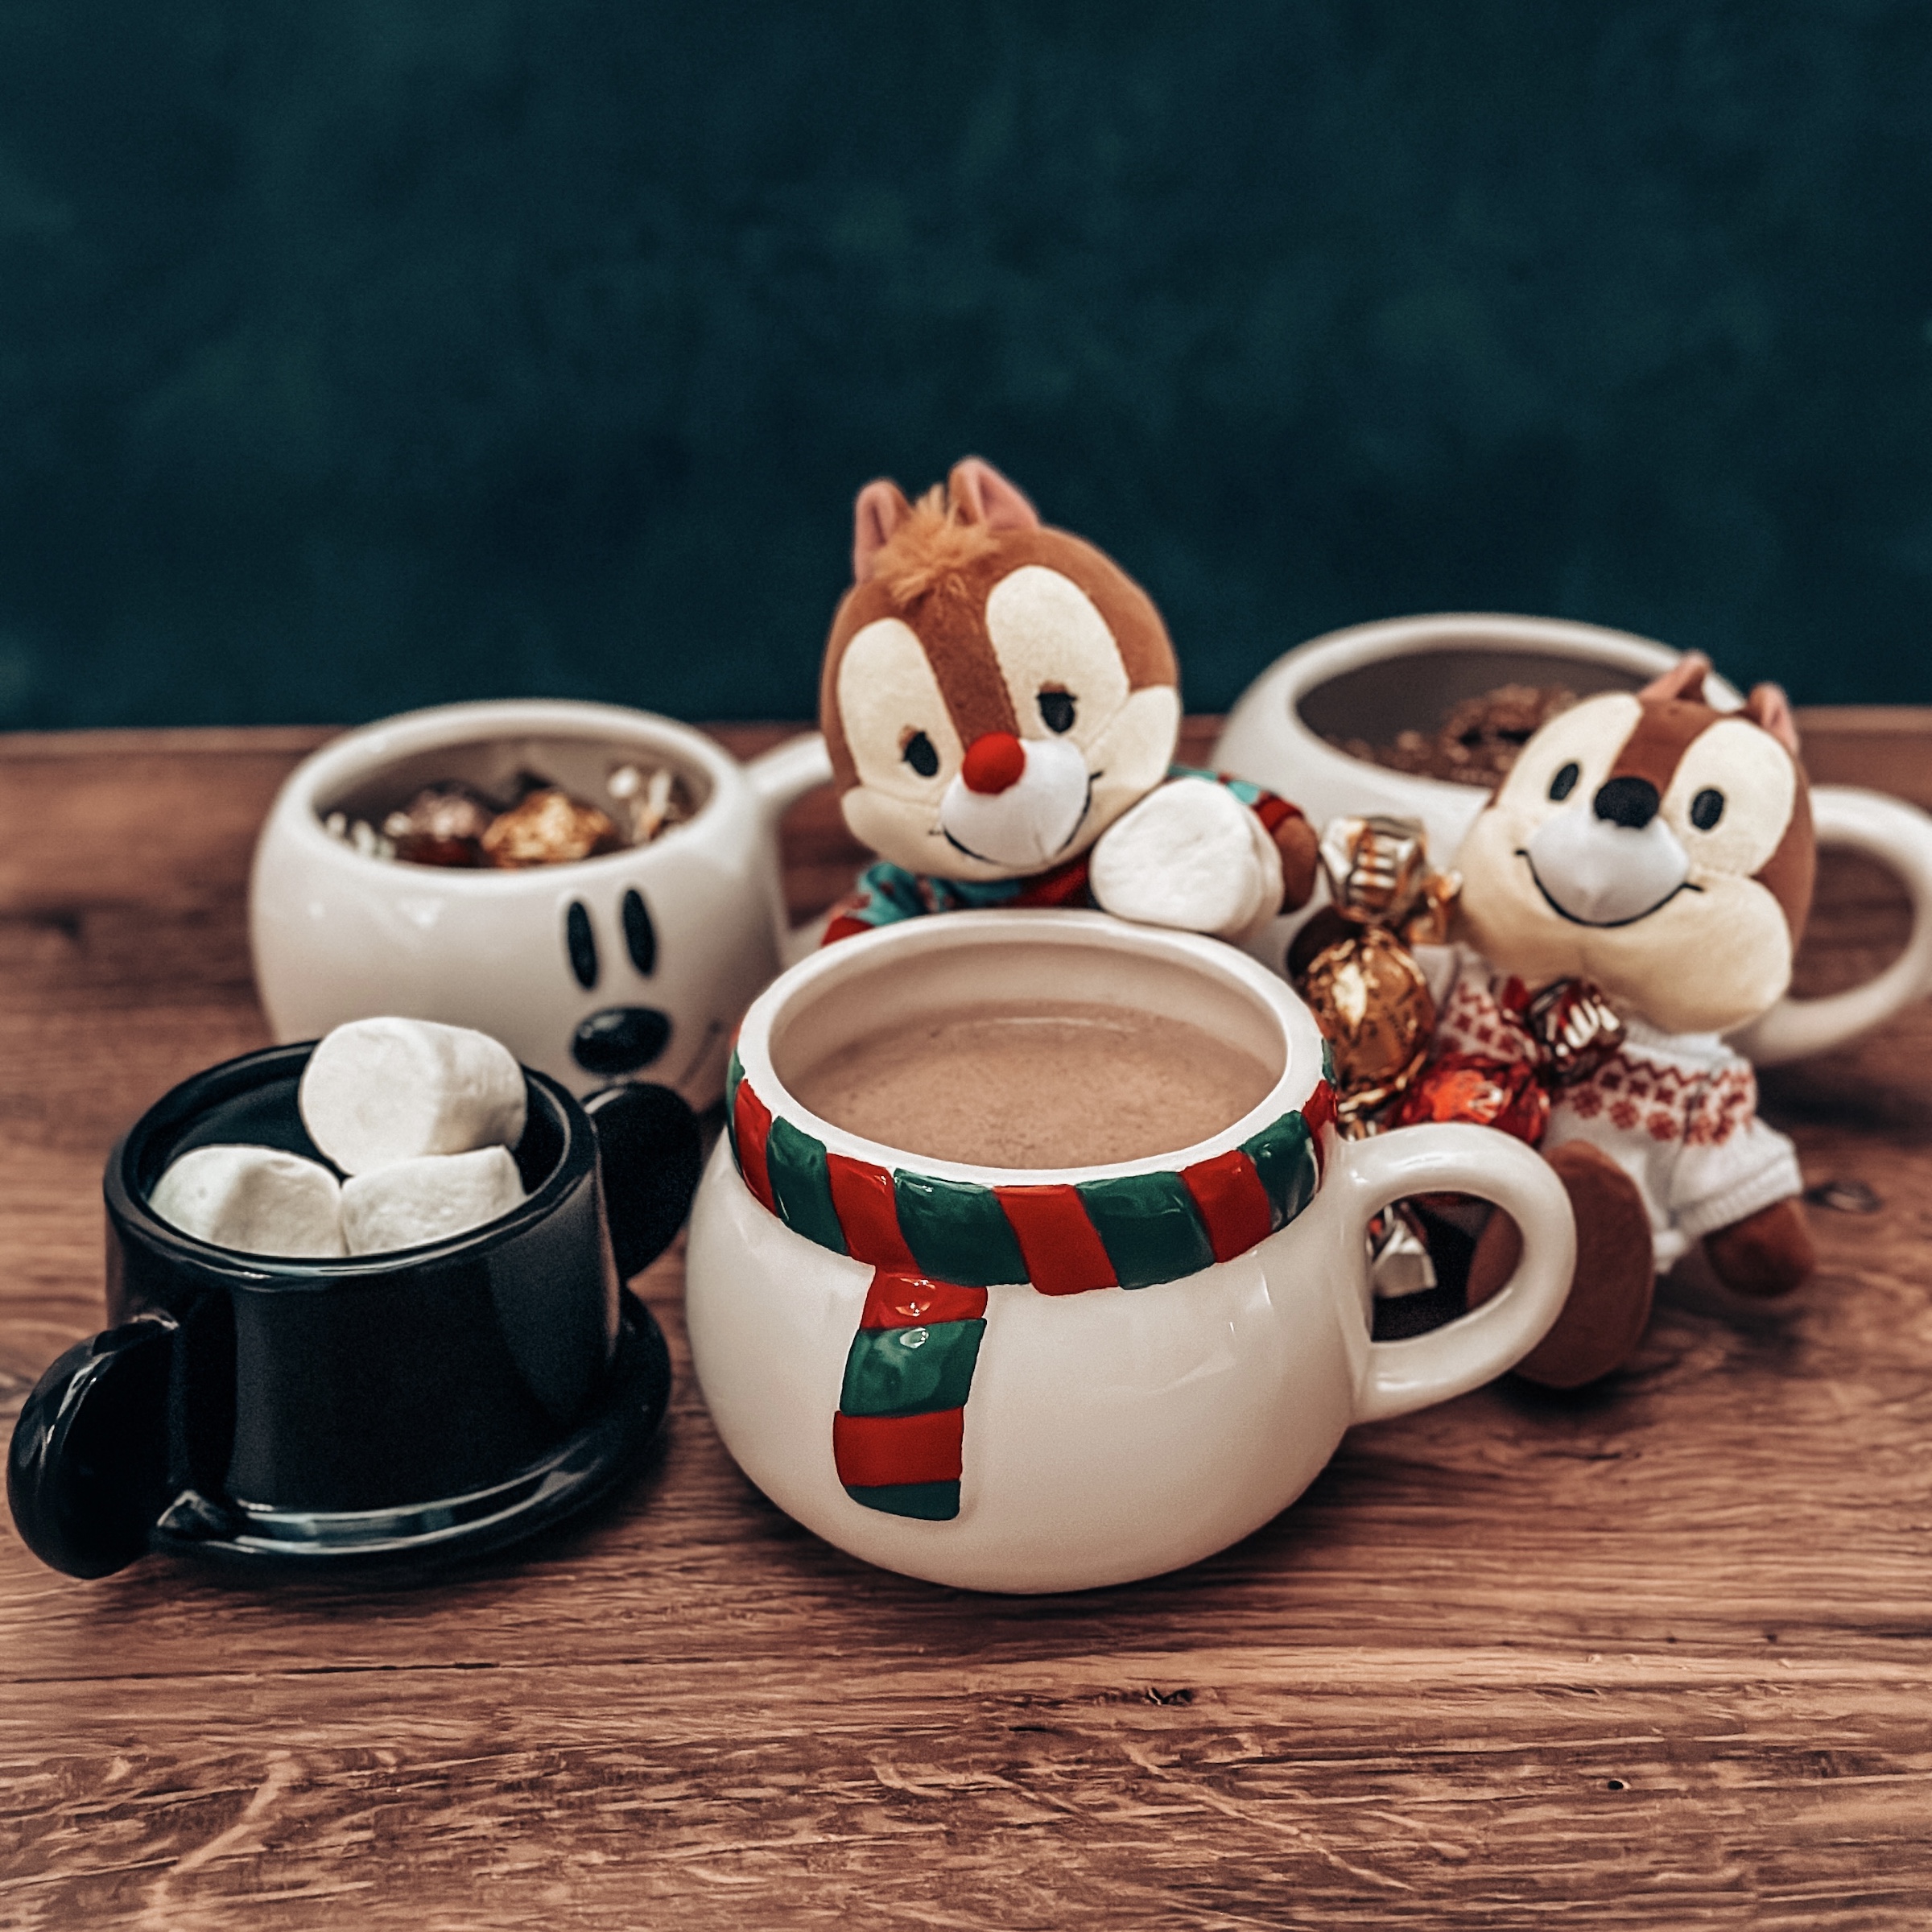 Chip & Dale's Hazelnut Cooca (Hot cocoa with hazelnut syrup in a snowman mug)